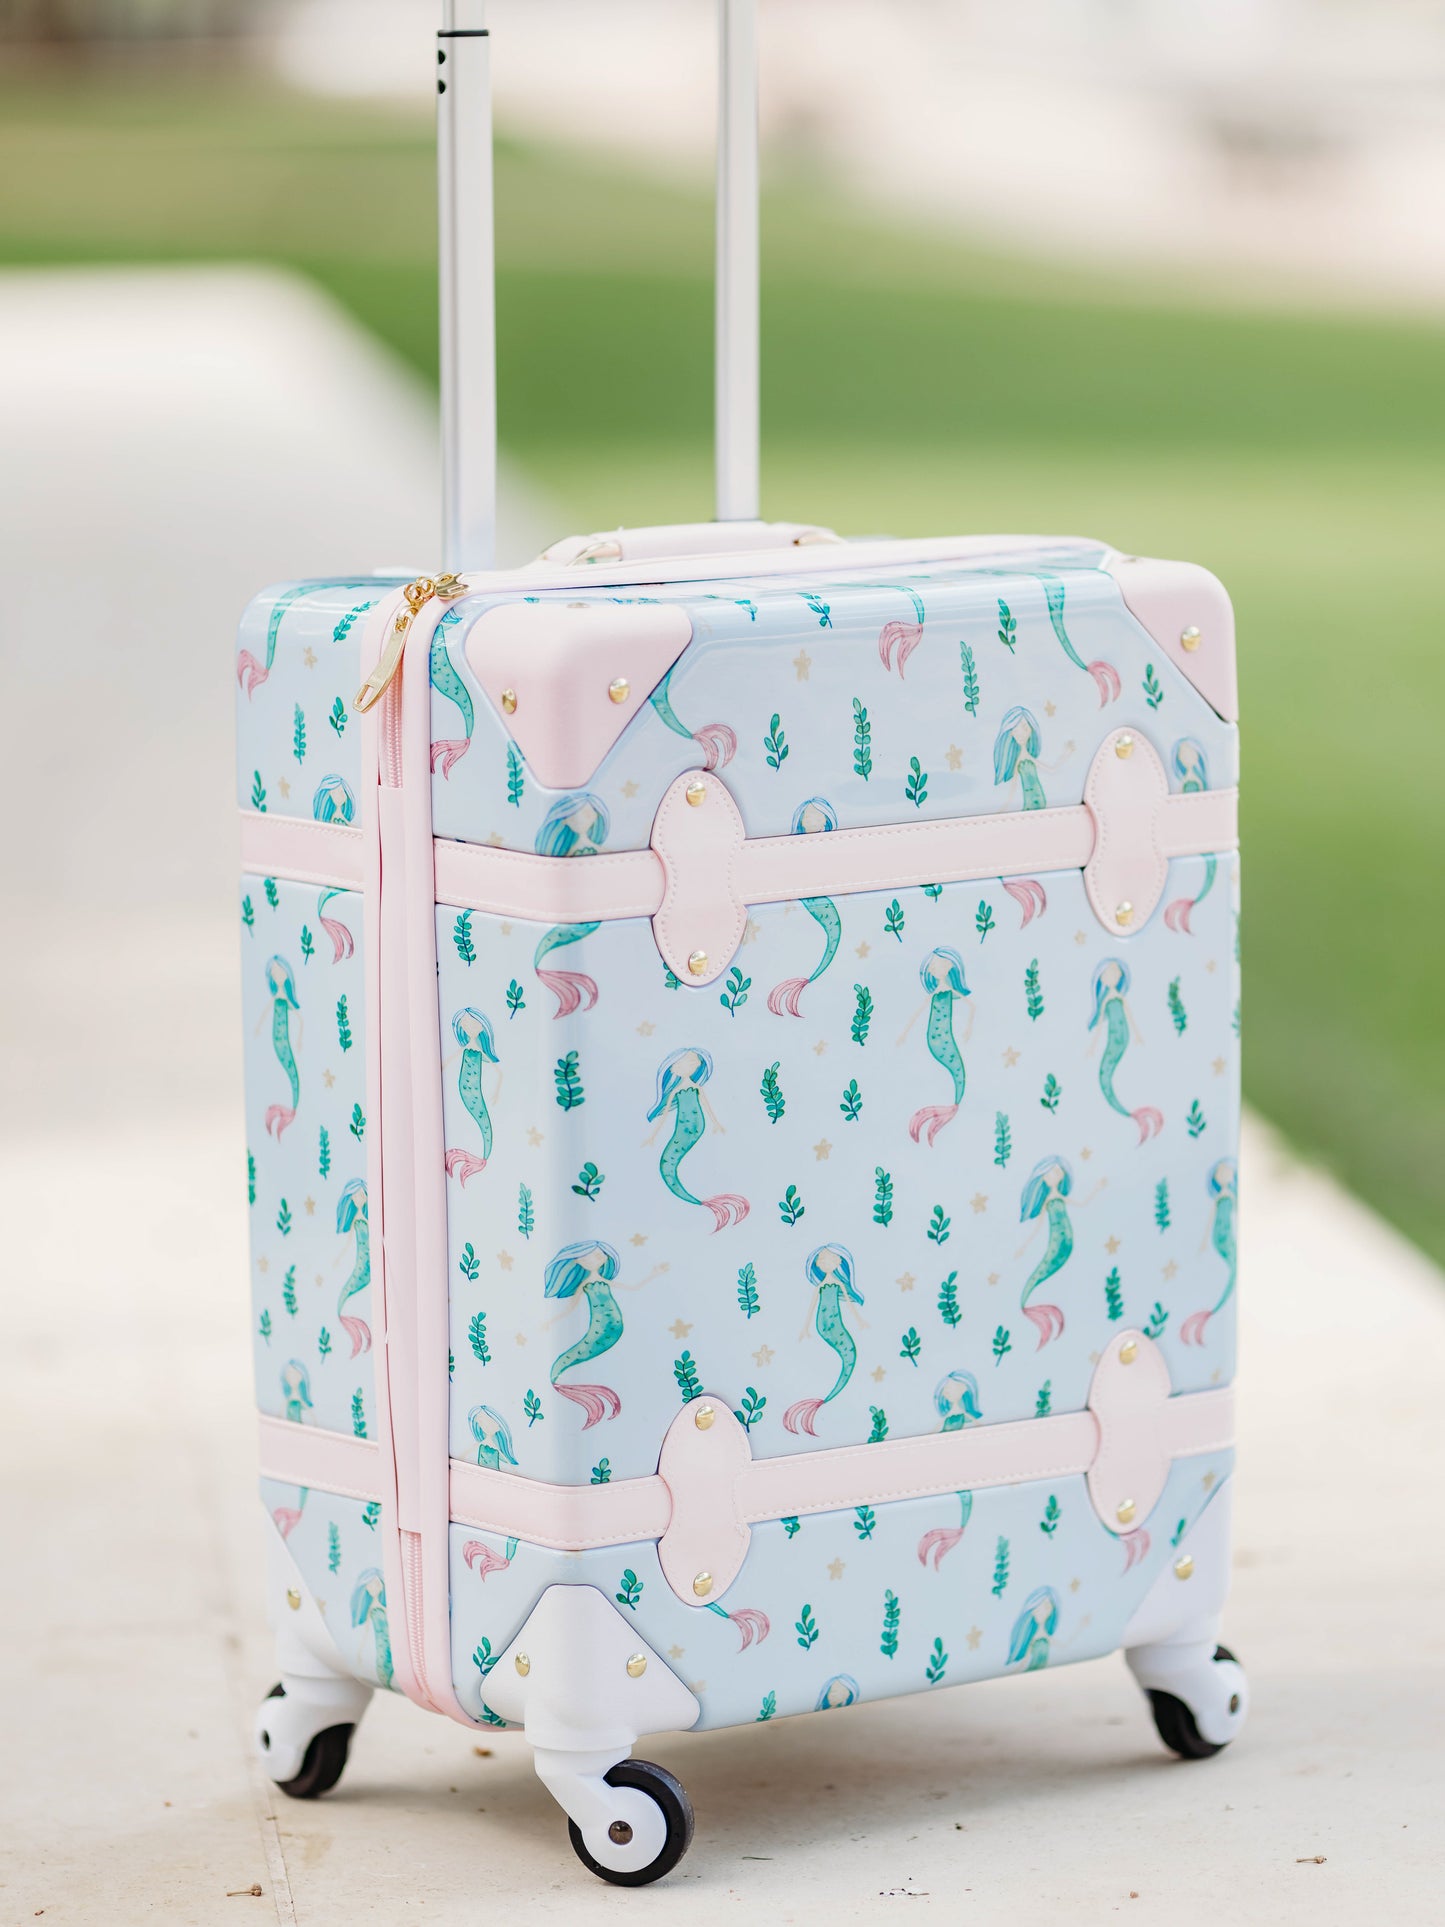 Lennon Traveling Luggage – Sea Princess. The outside of this luggage is a pattern of mermaids and little green sea plants on a pale blue background. The inside lining is a pattern of pale blue starfish like stars on a blue background.